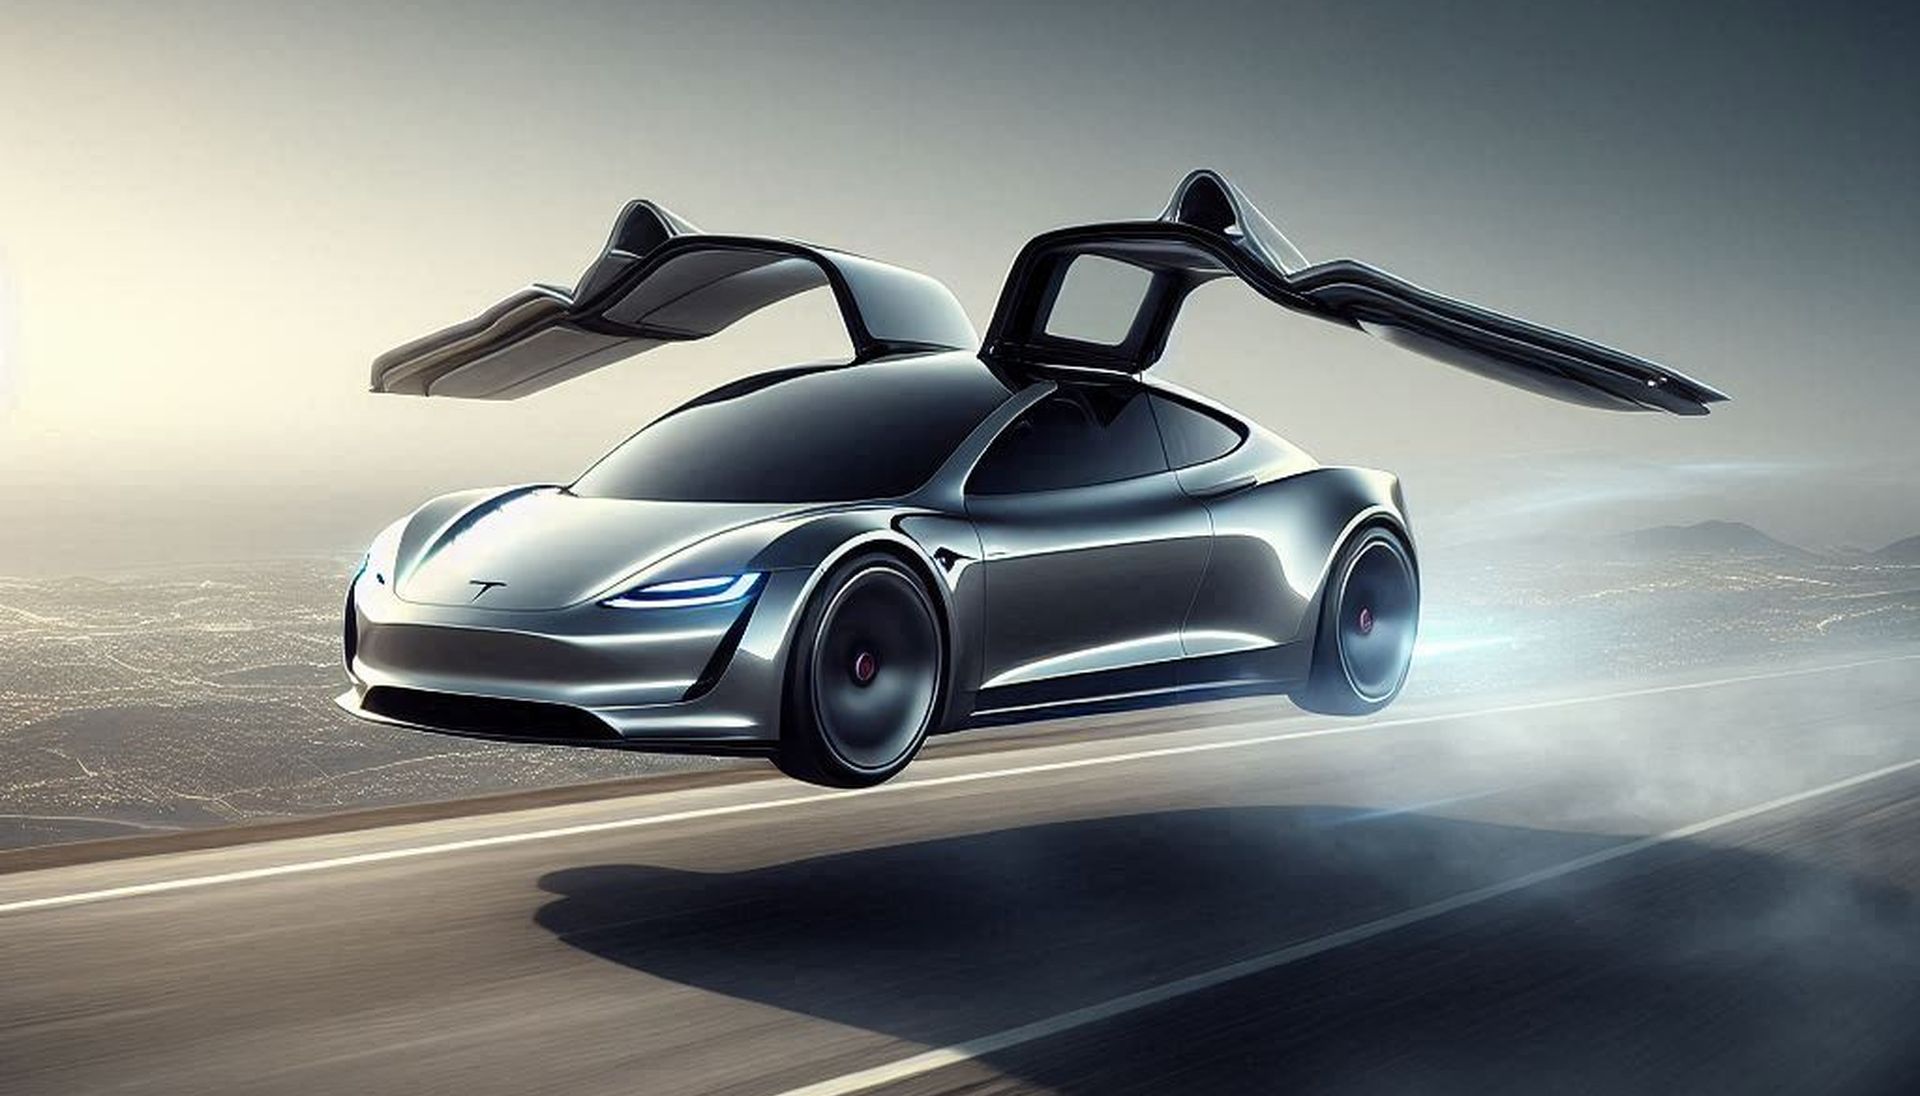 2025 Tesla Roadster can fly, says Elon Musk